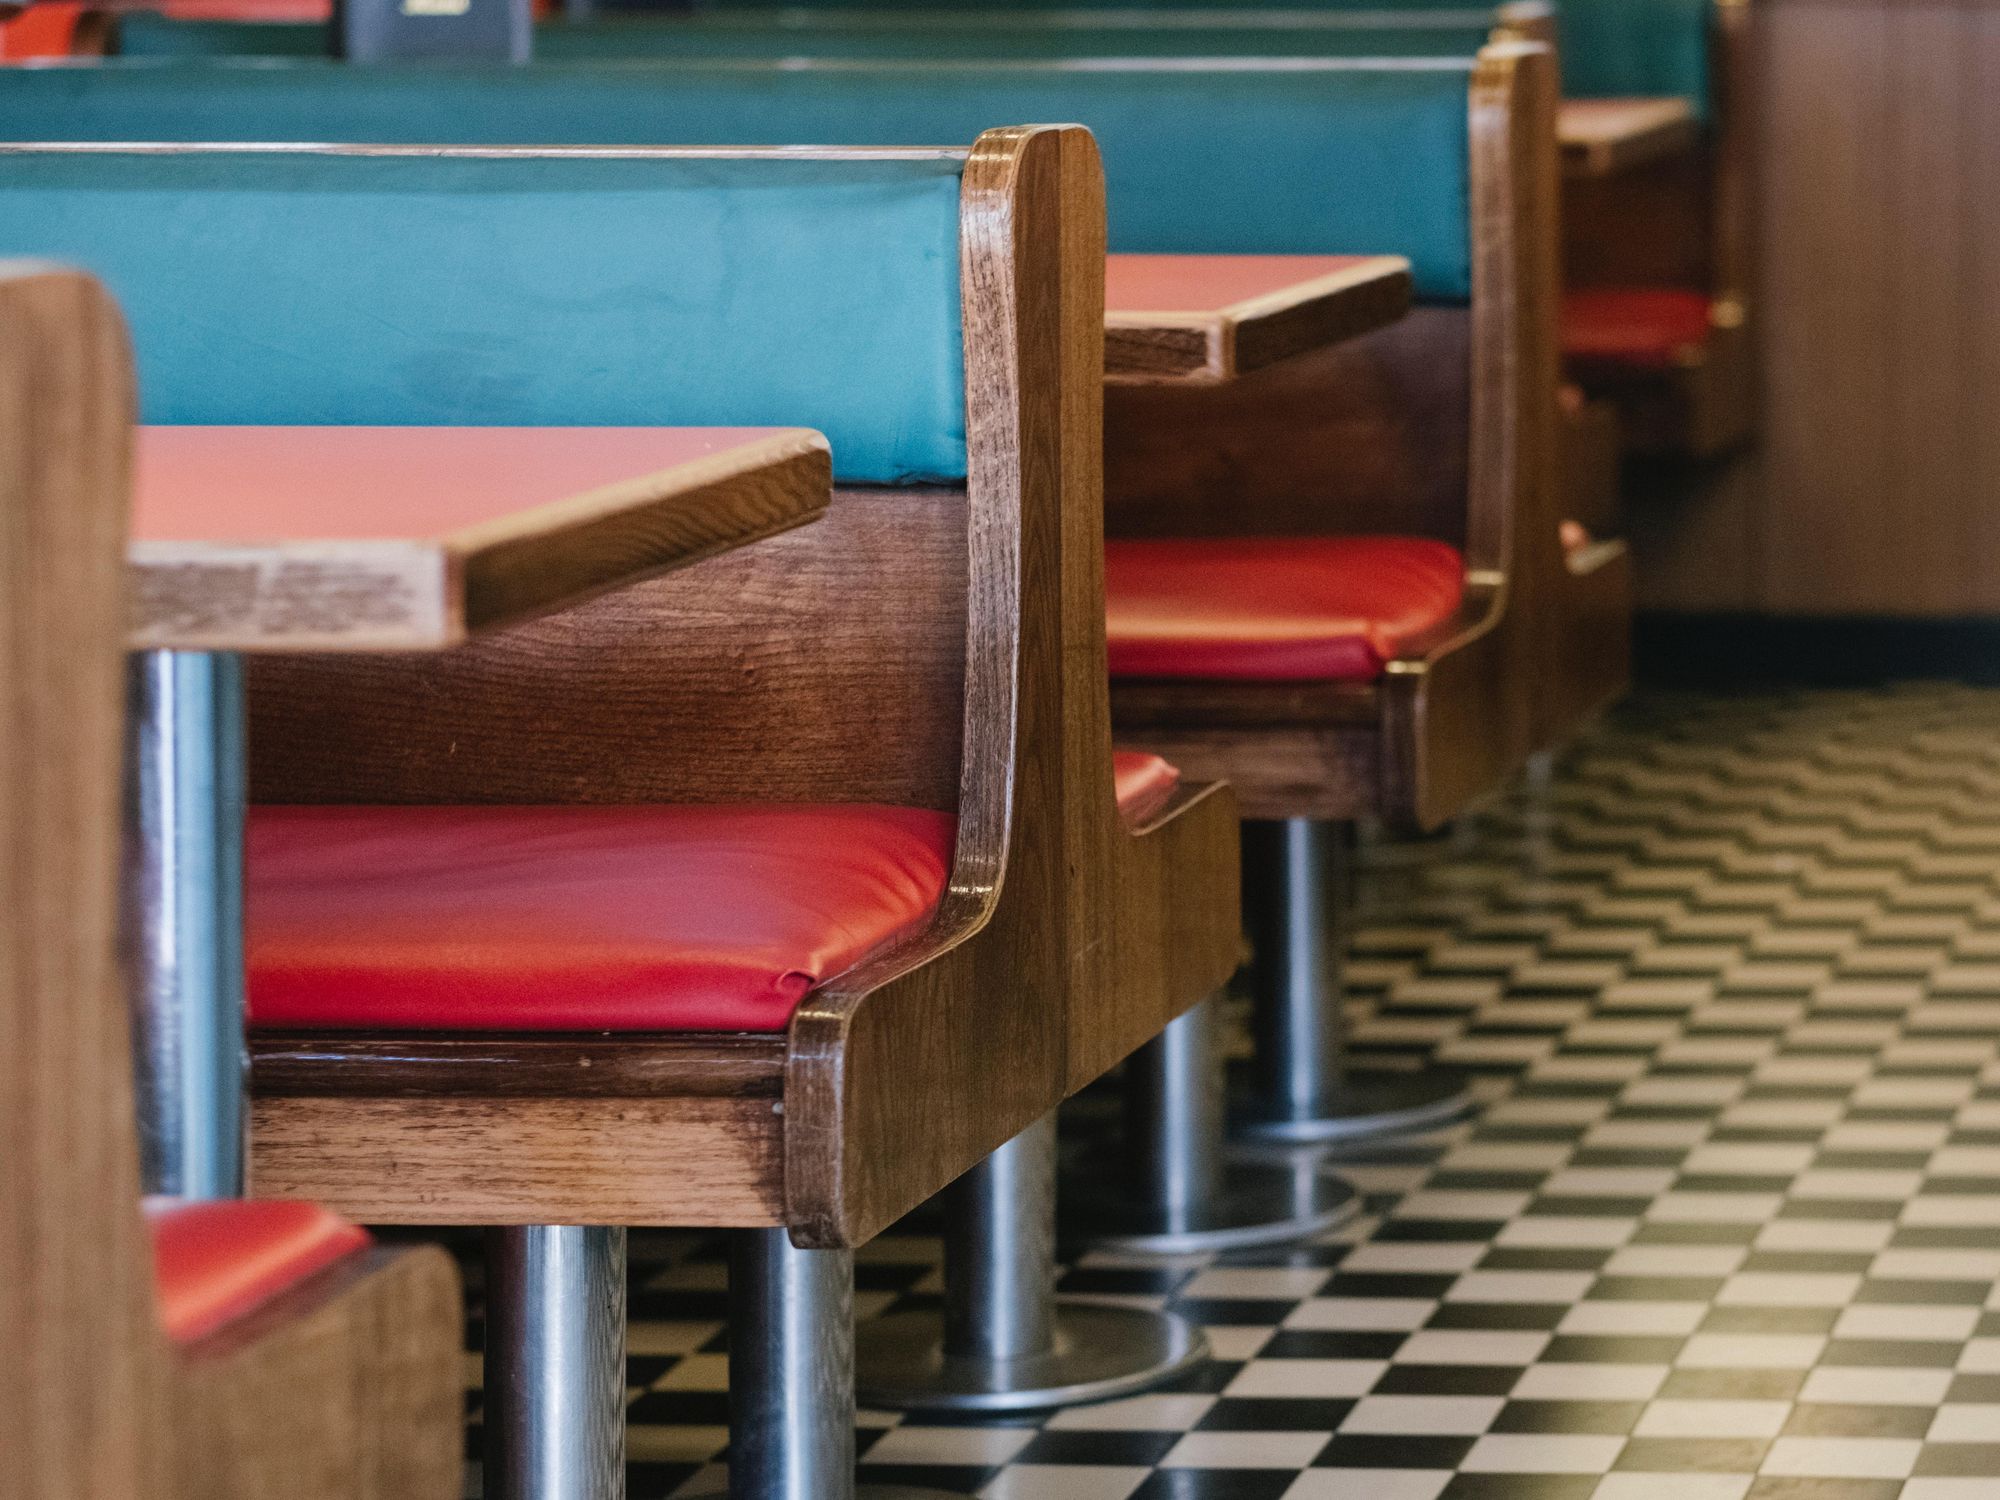 Diner benches